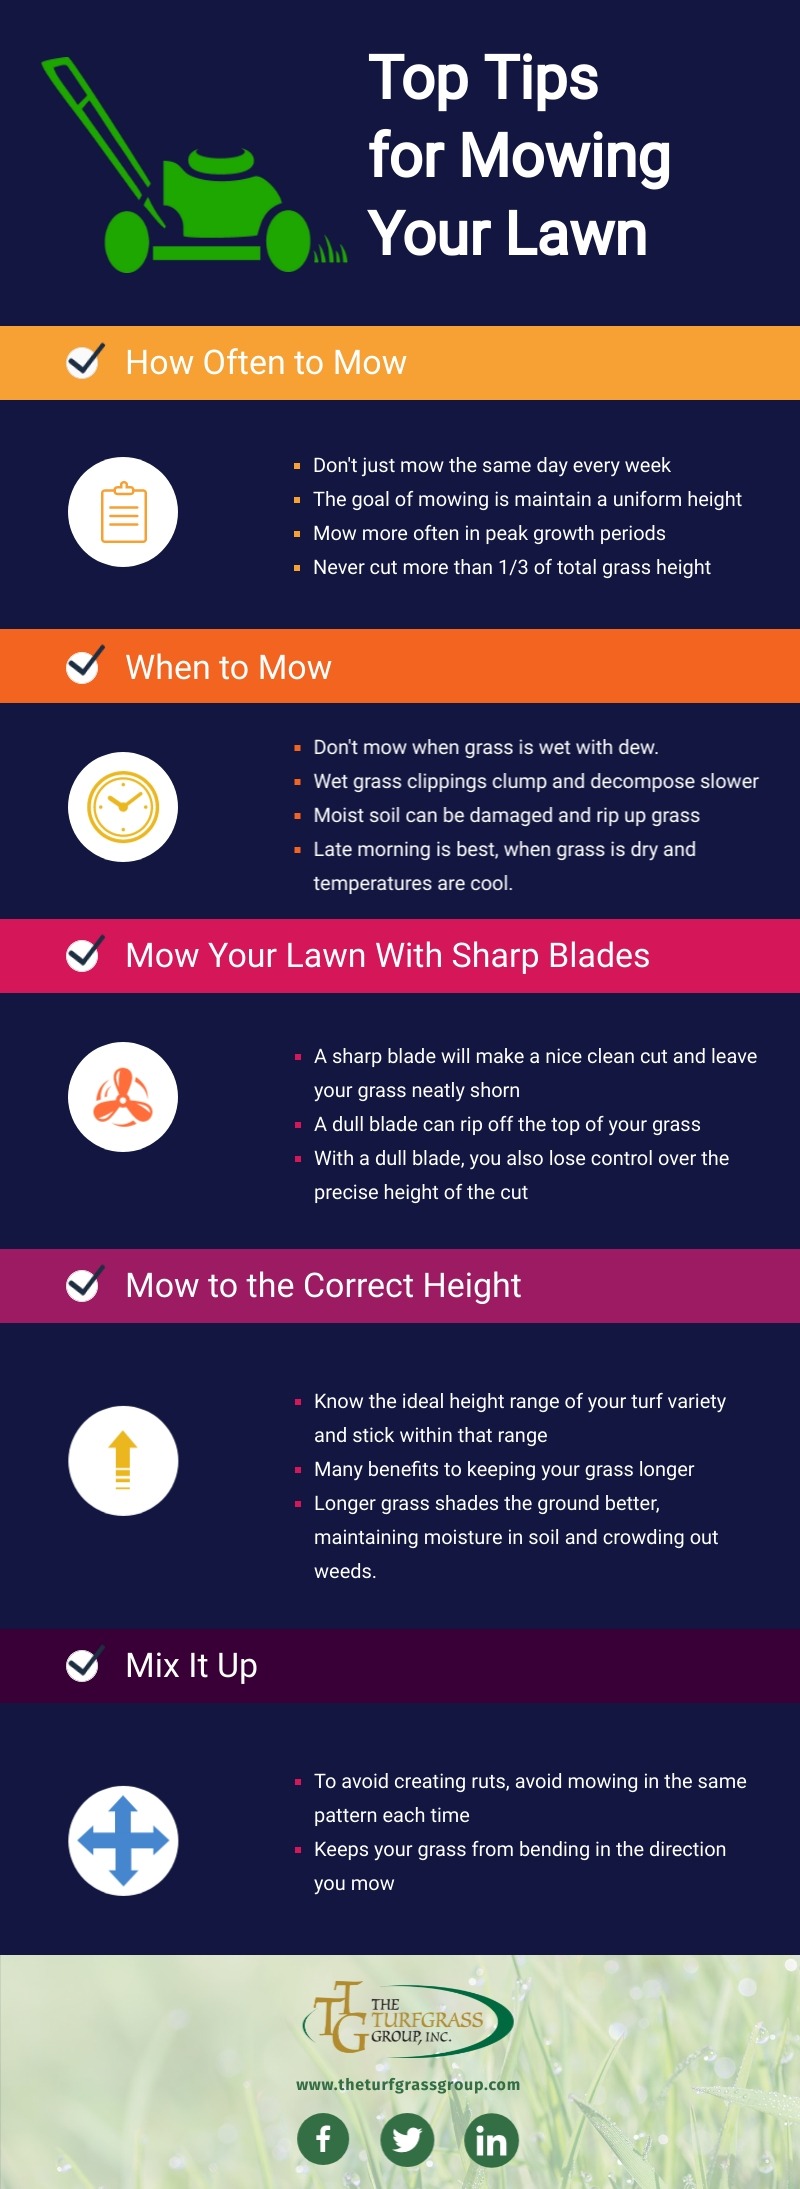 Our Top Tips for Mowing Your Lawn [infographic]